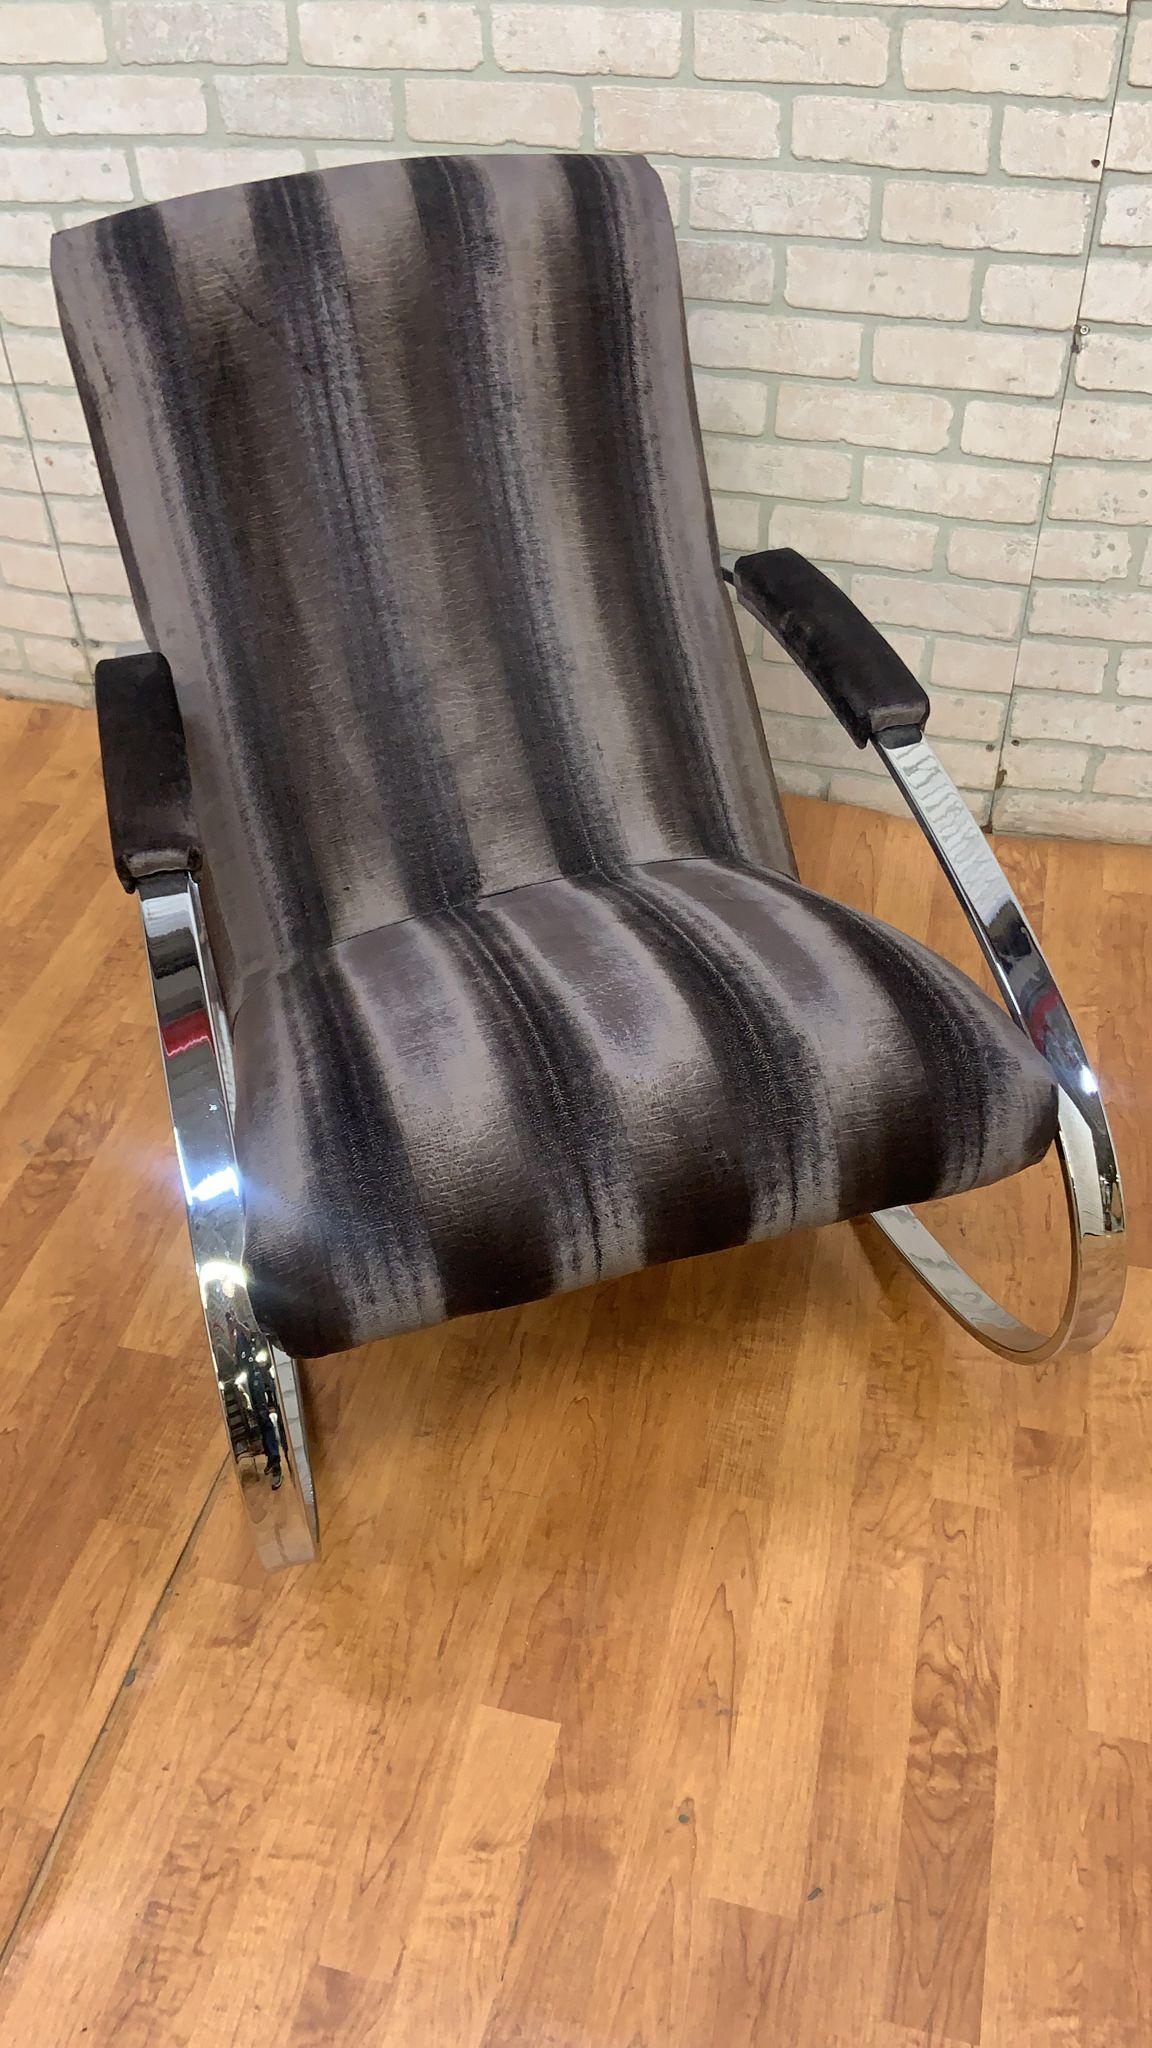 American Midcentury Milo Baughman Chrome Flat Bar Oval Rocking Chair Newly Upholstered For Sale